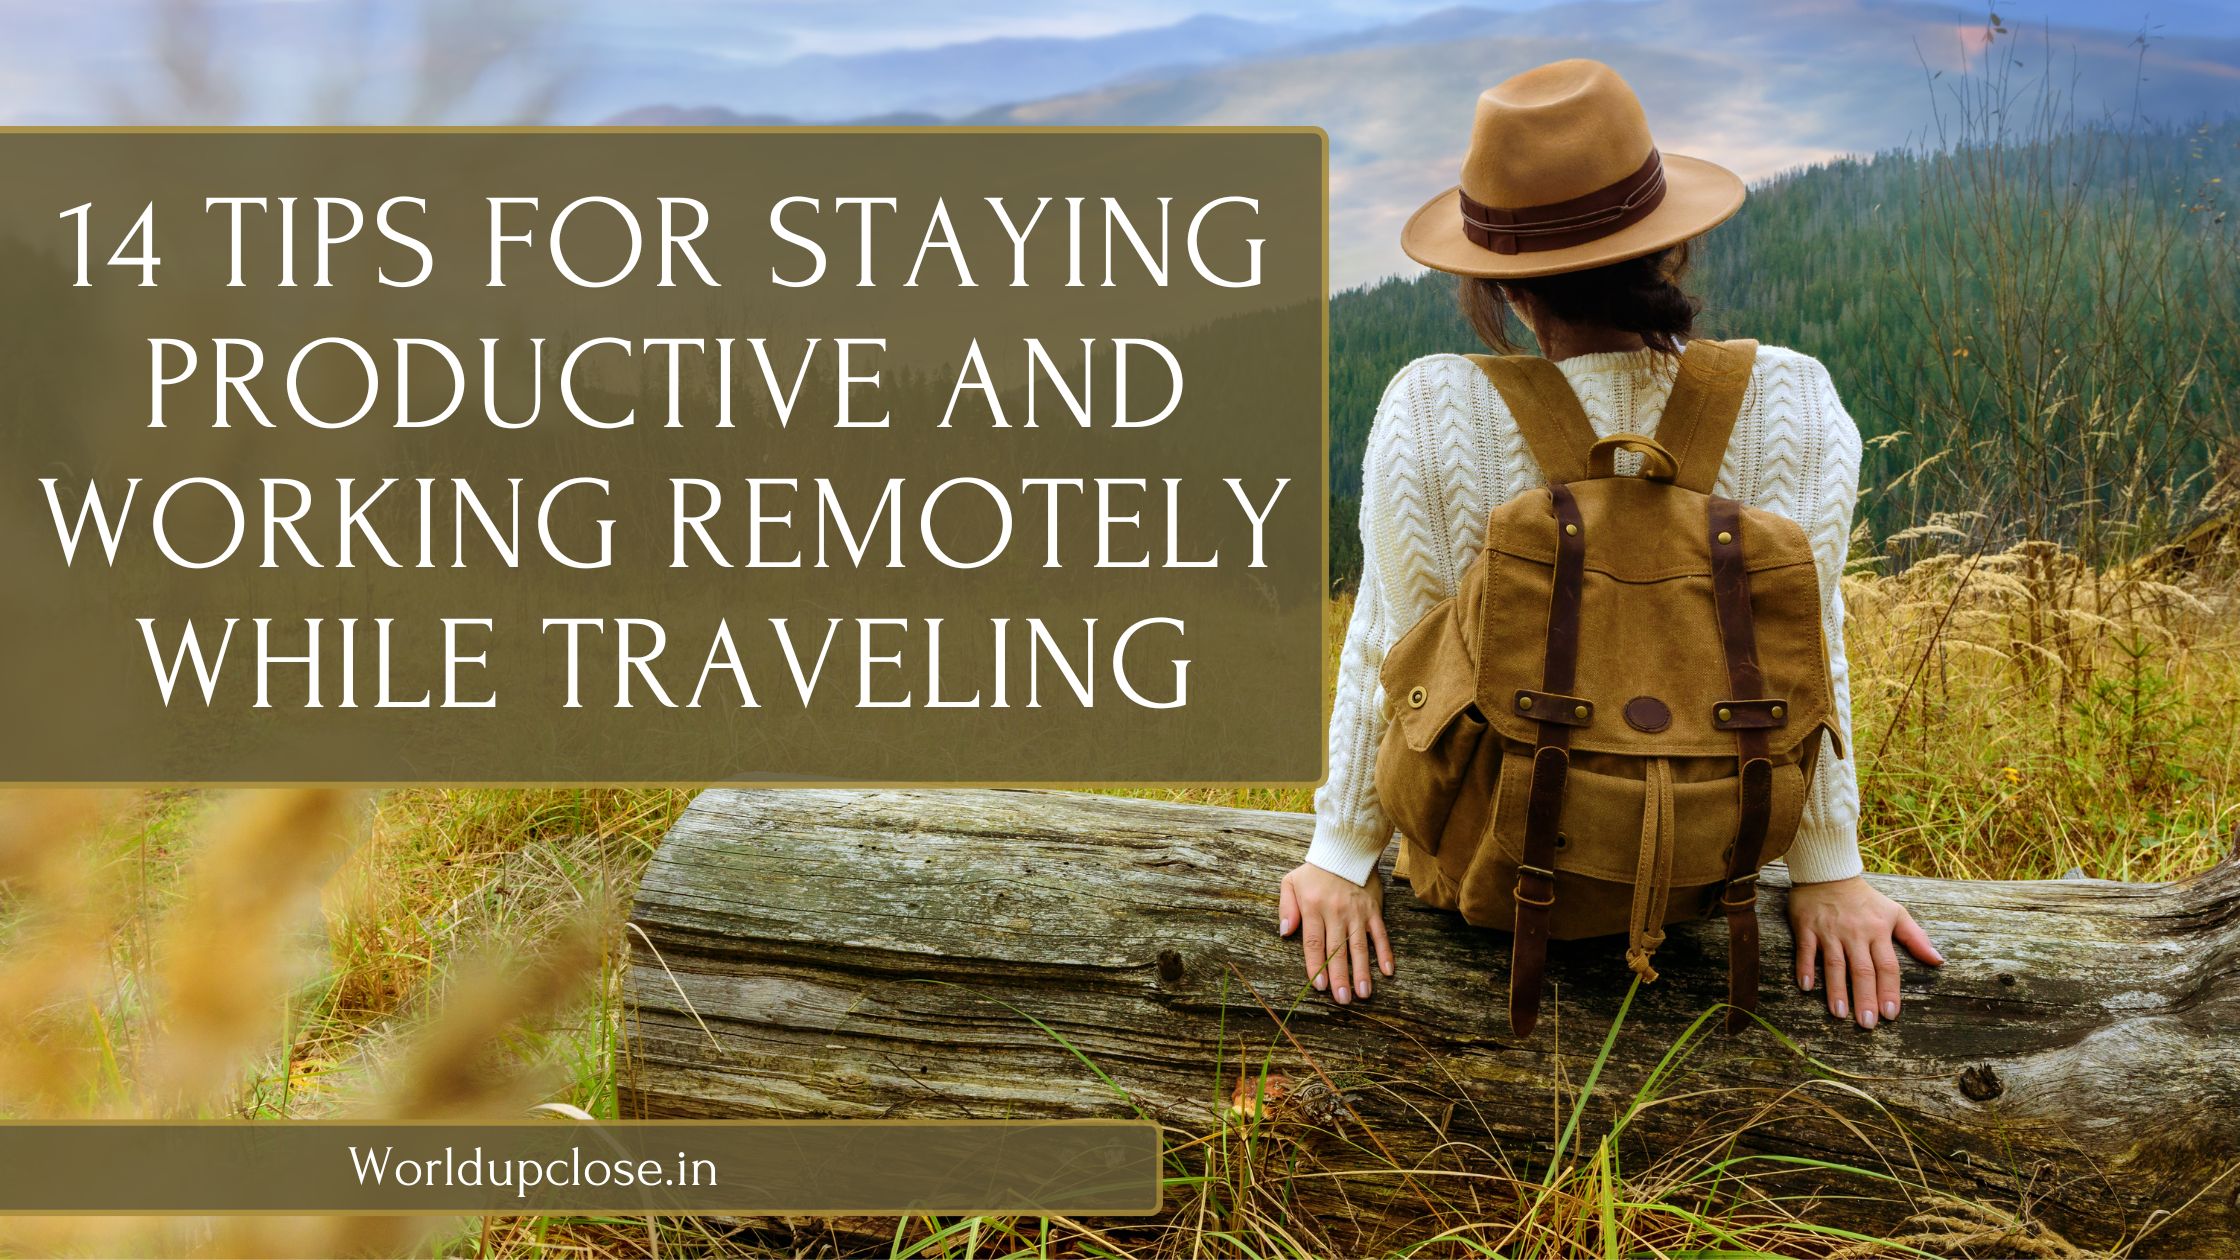 14 Tips for staying productive and working remotely while traveling 7